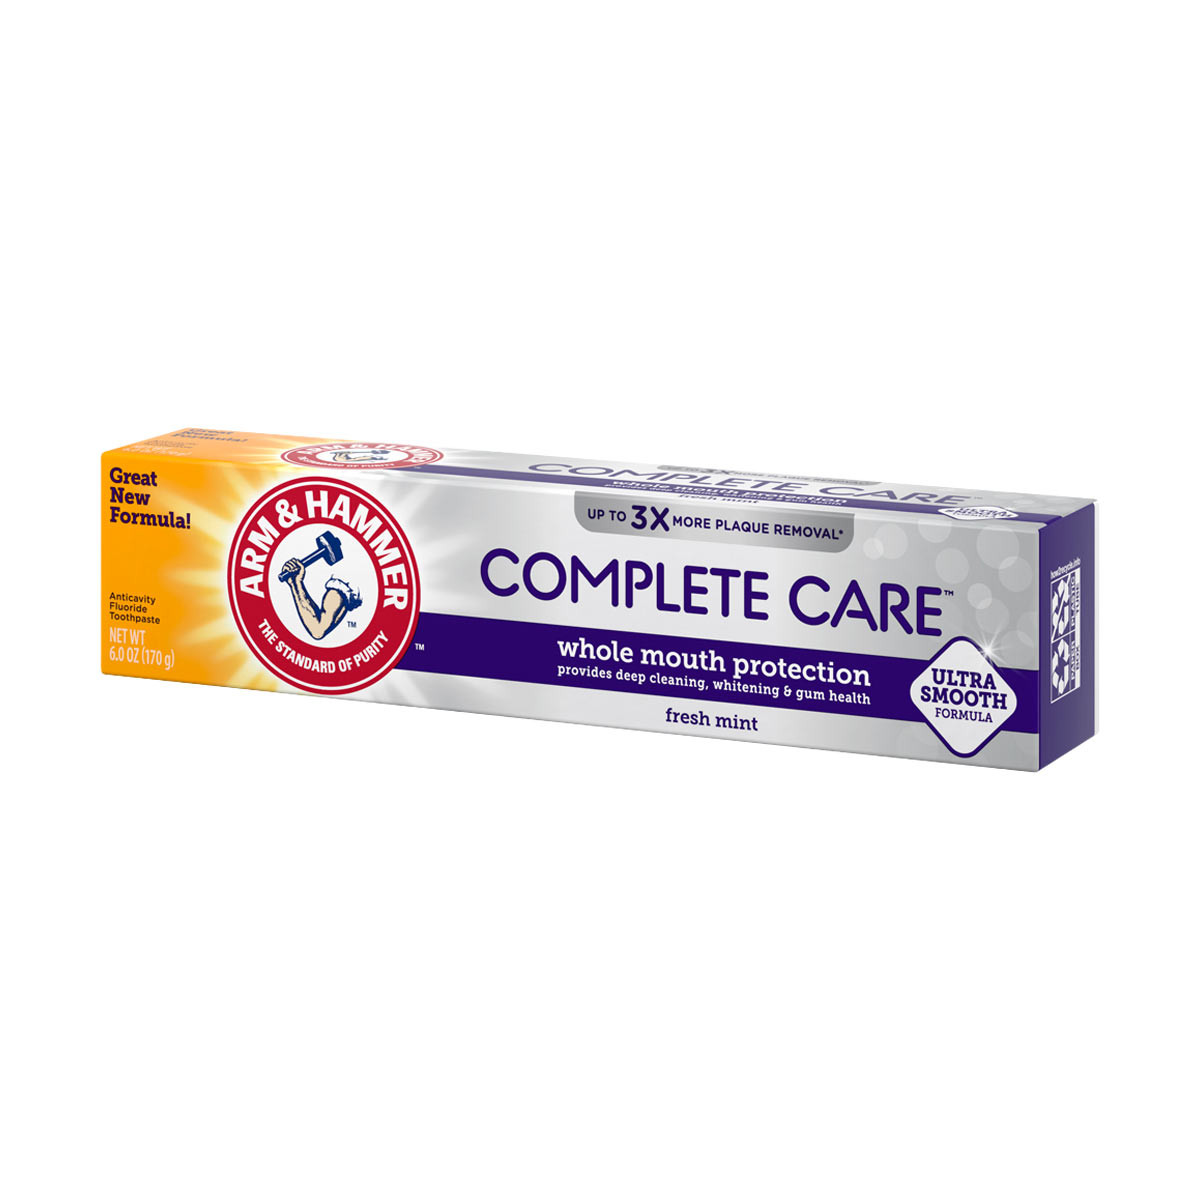 Arm & Hammer Toothpaste Complete Care, 6 oz